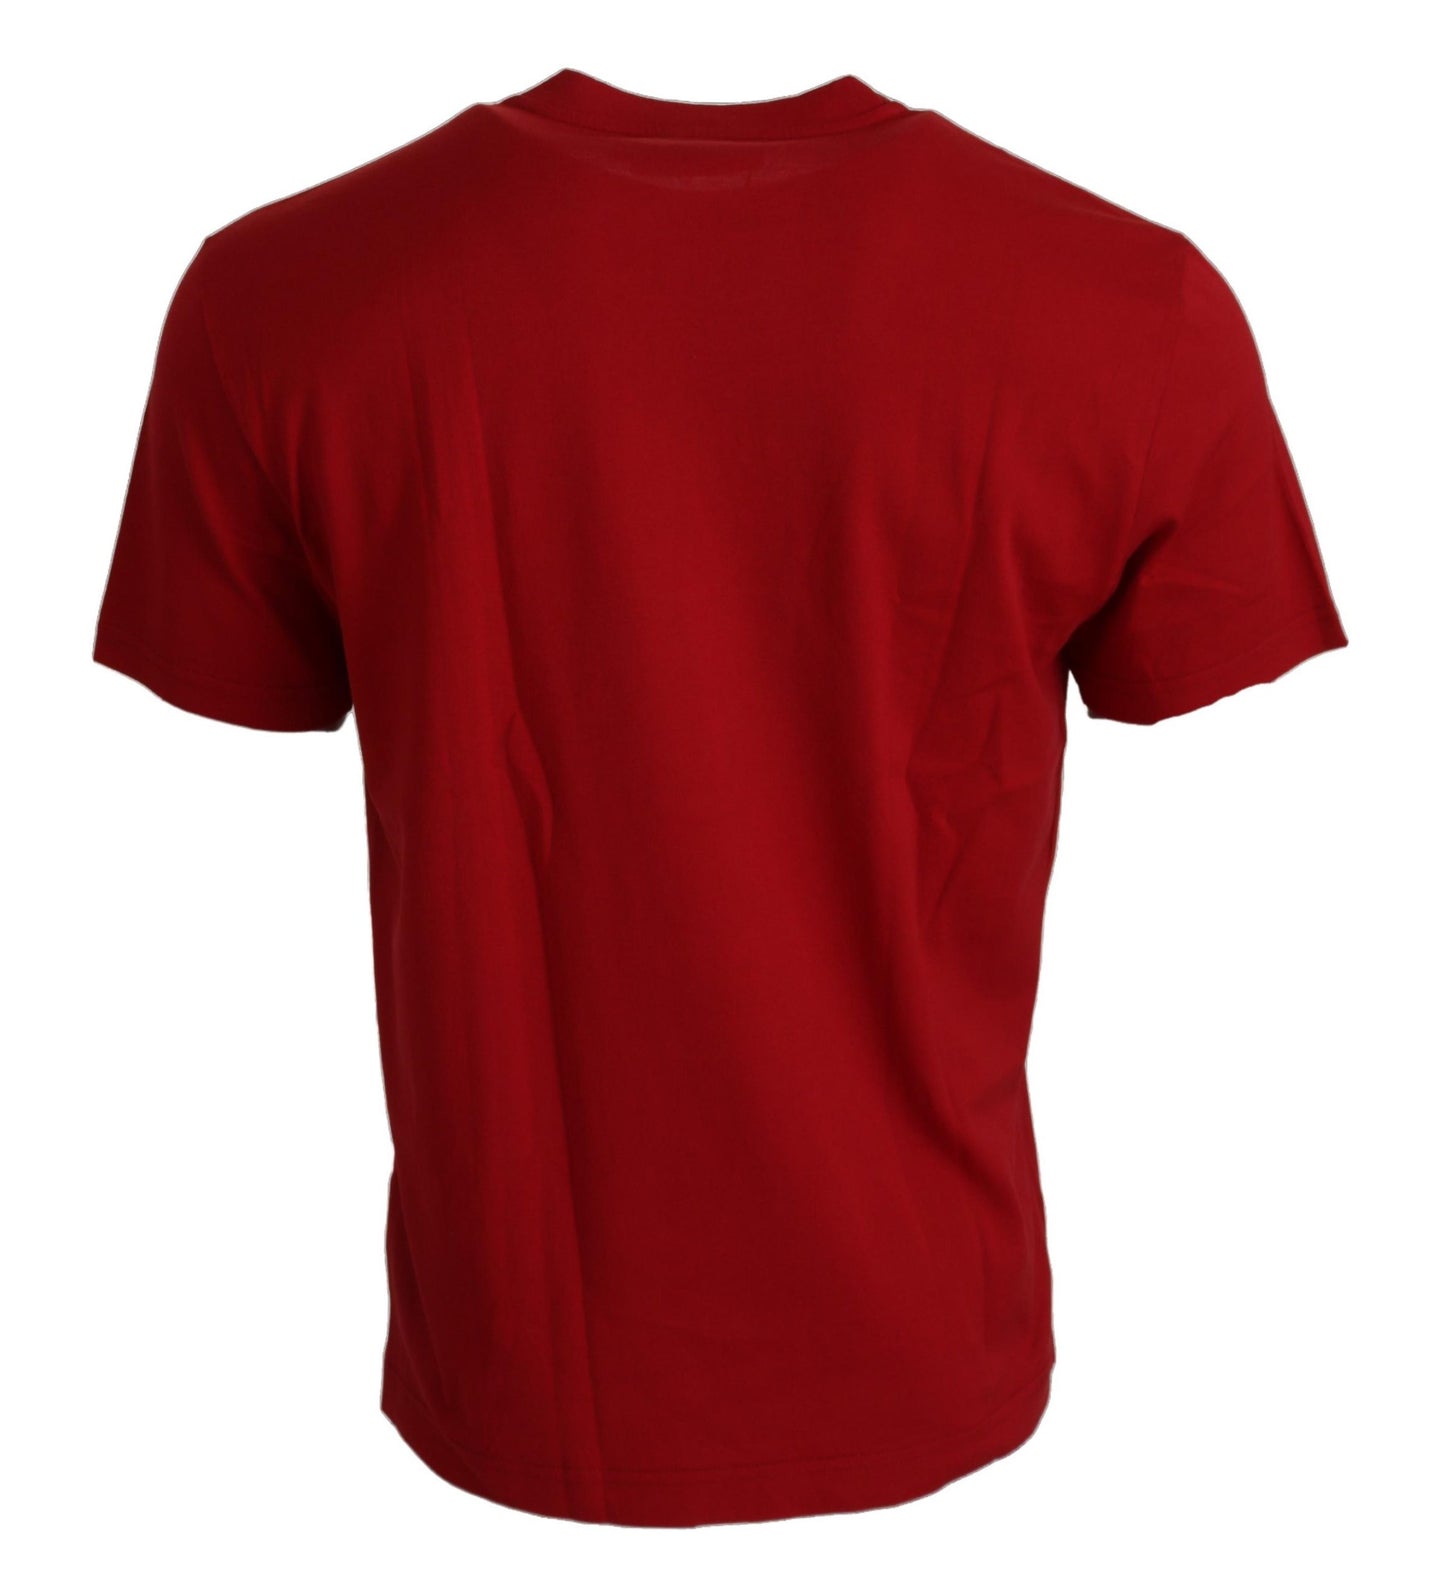 Exclusive Crewneck Logo T-Shirt in Red